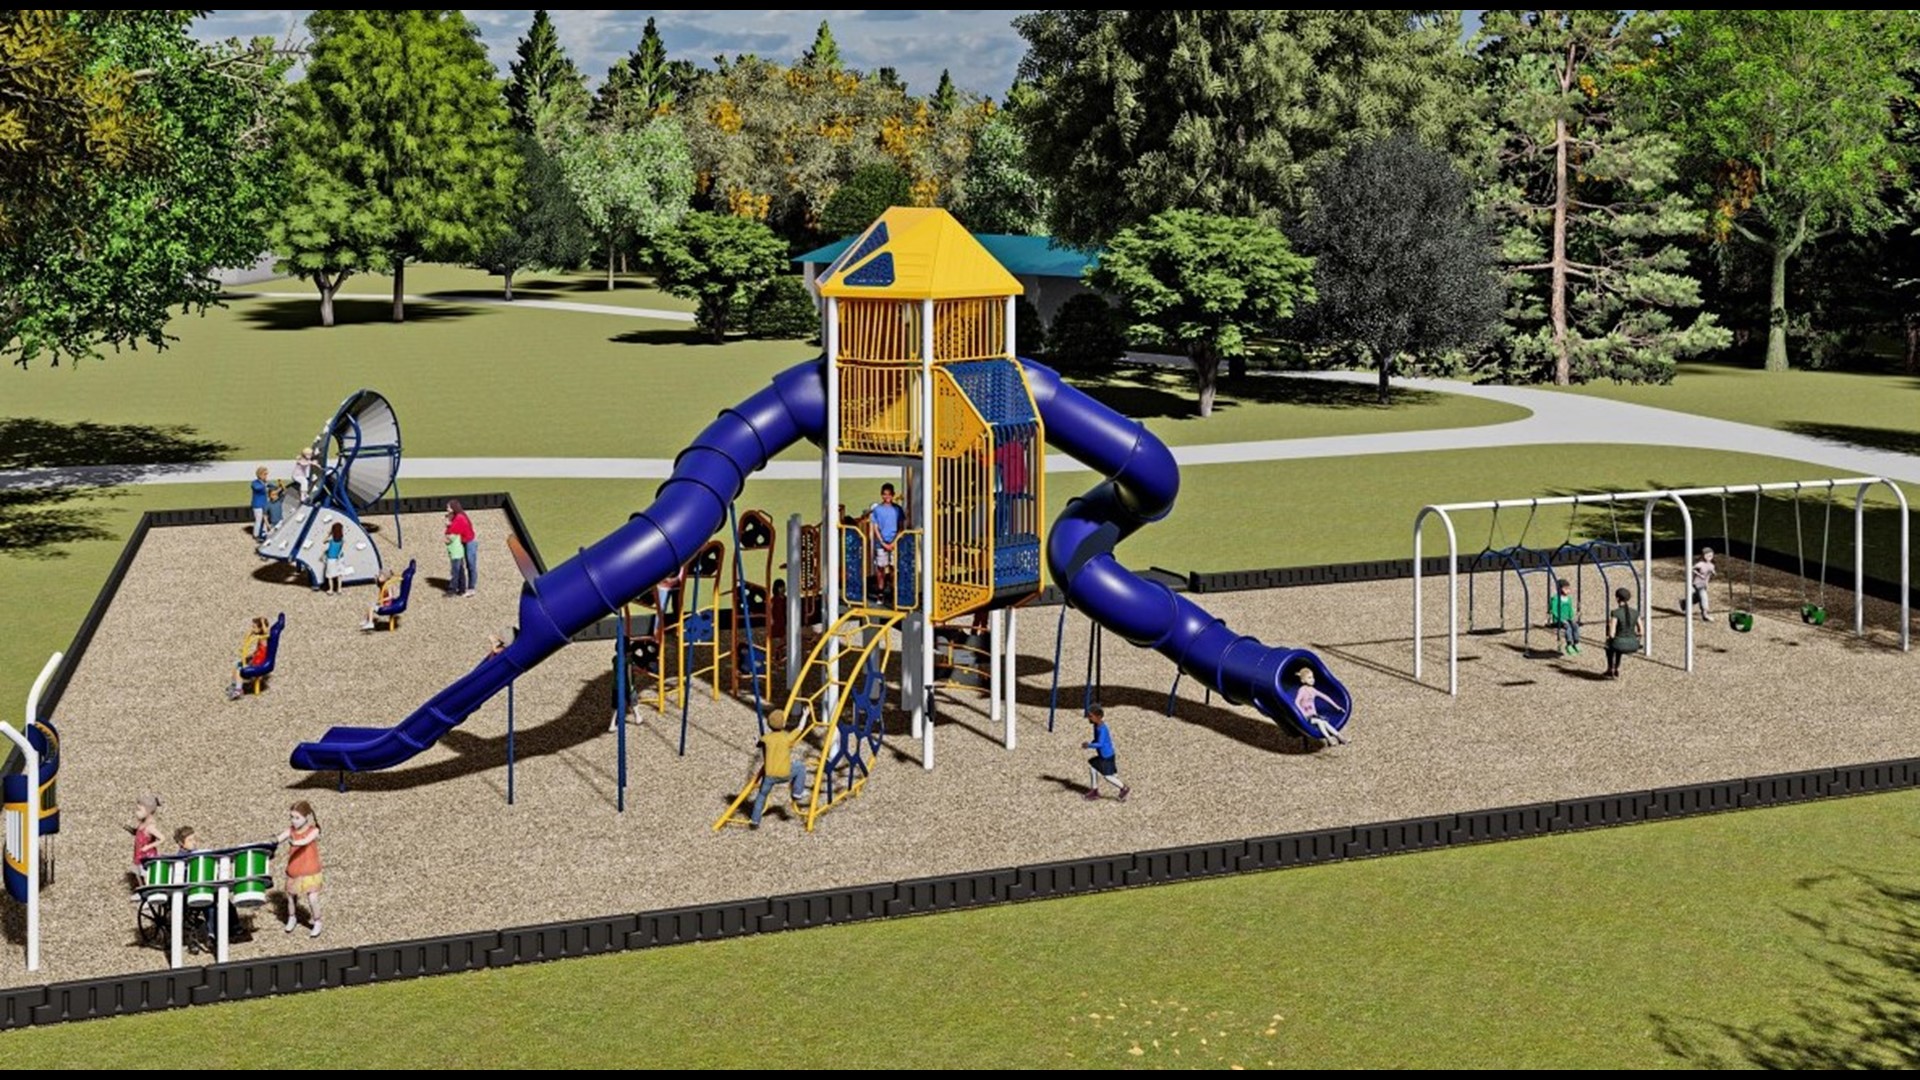 Karstens Park in Moline is getting a new playground